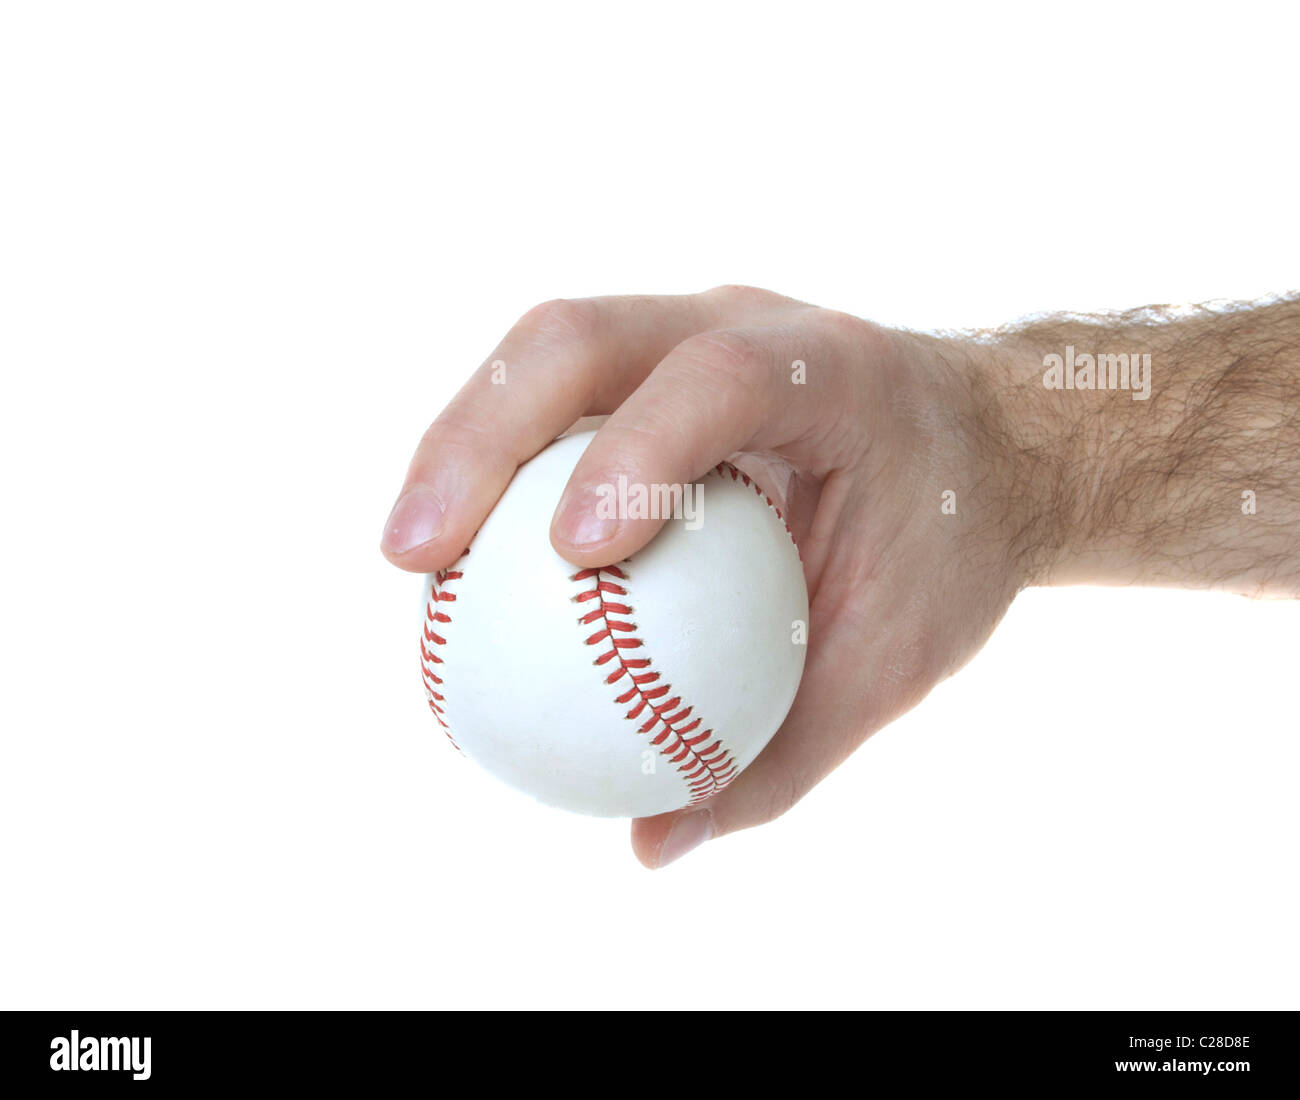 Collection 93+ Images how to hold a 4-seam fastball Full HD, 2k, 4k